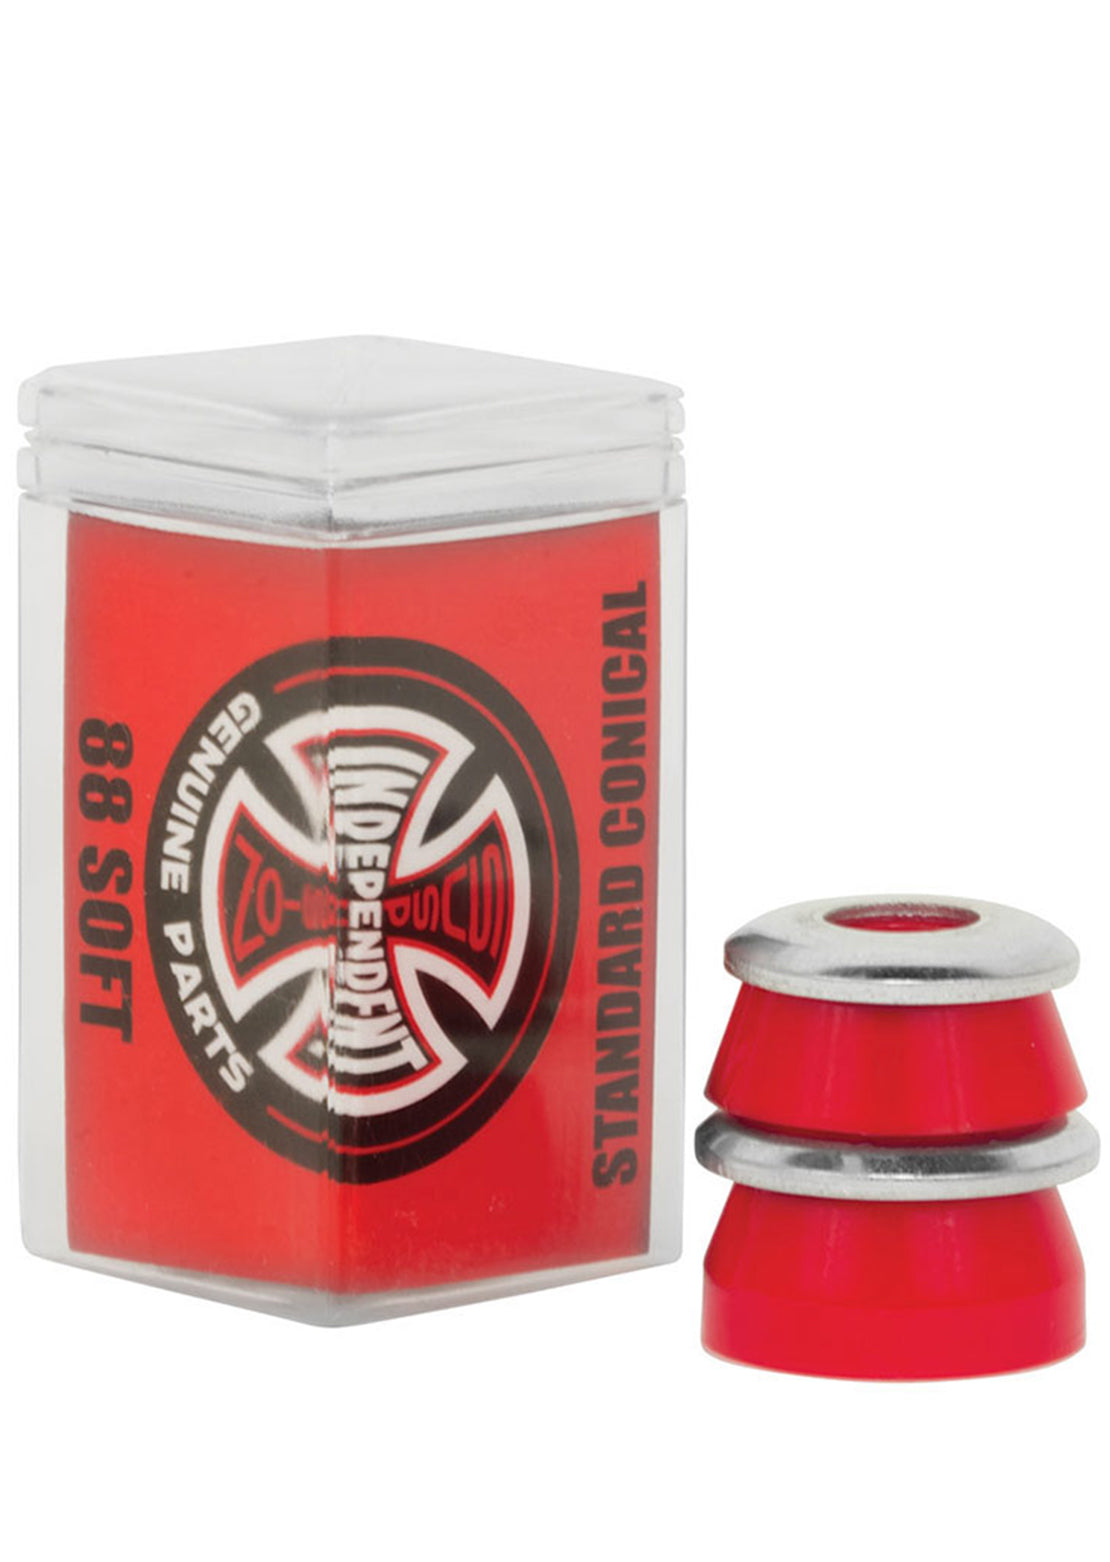 Independent Standard Bushings Red - Conical - Soft - 88a